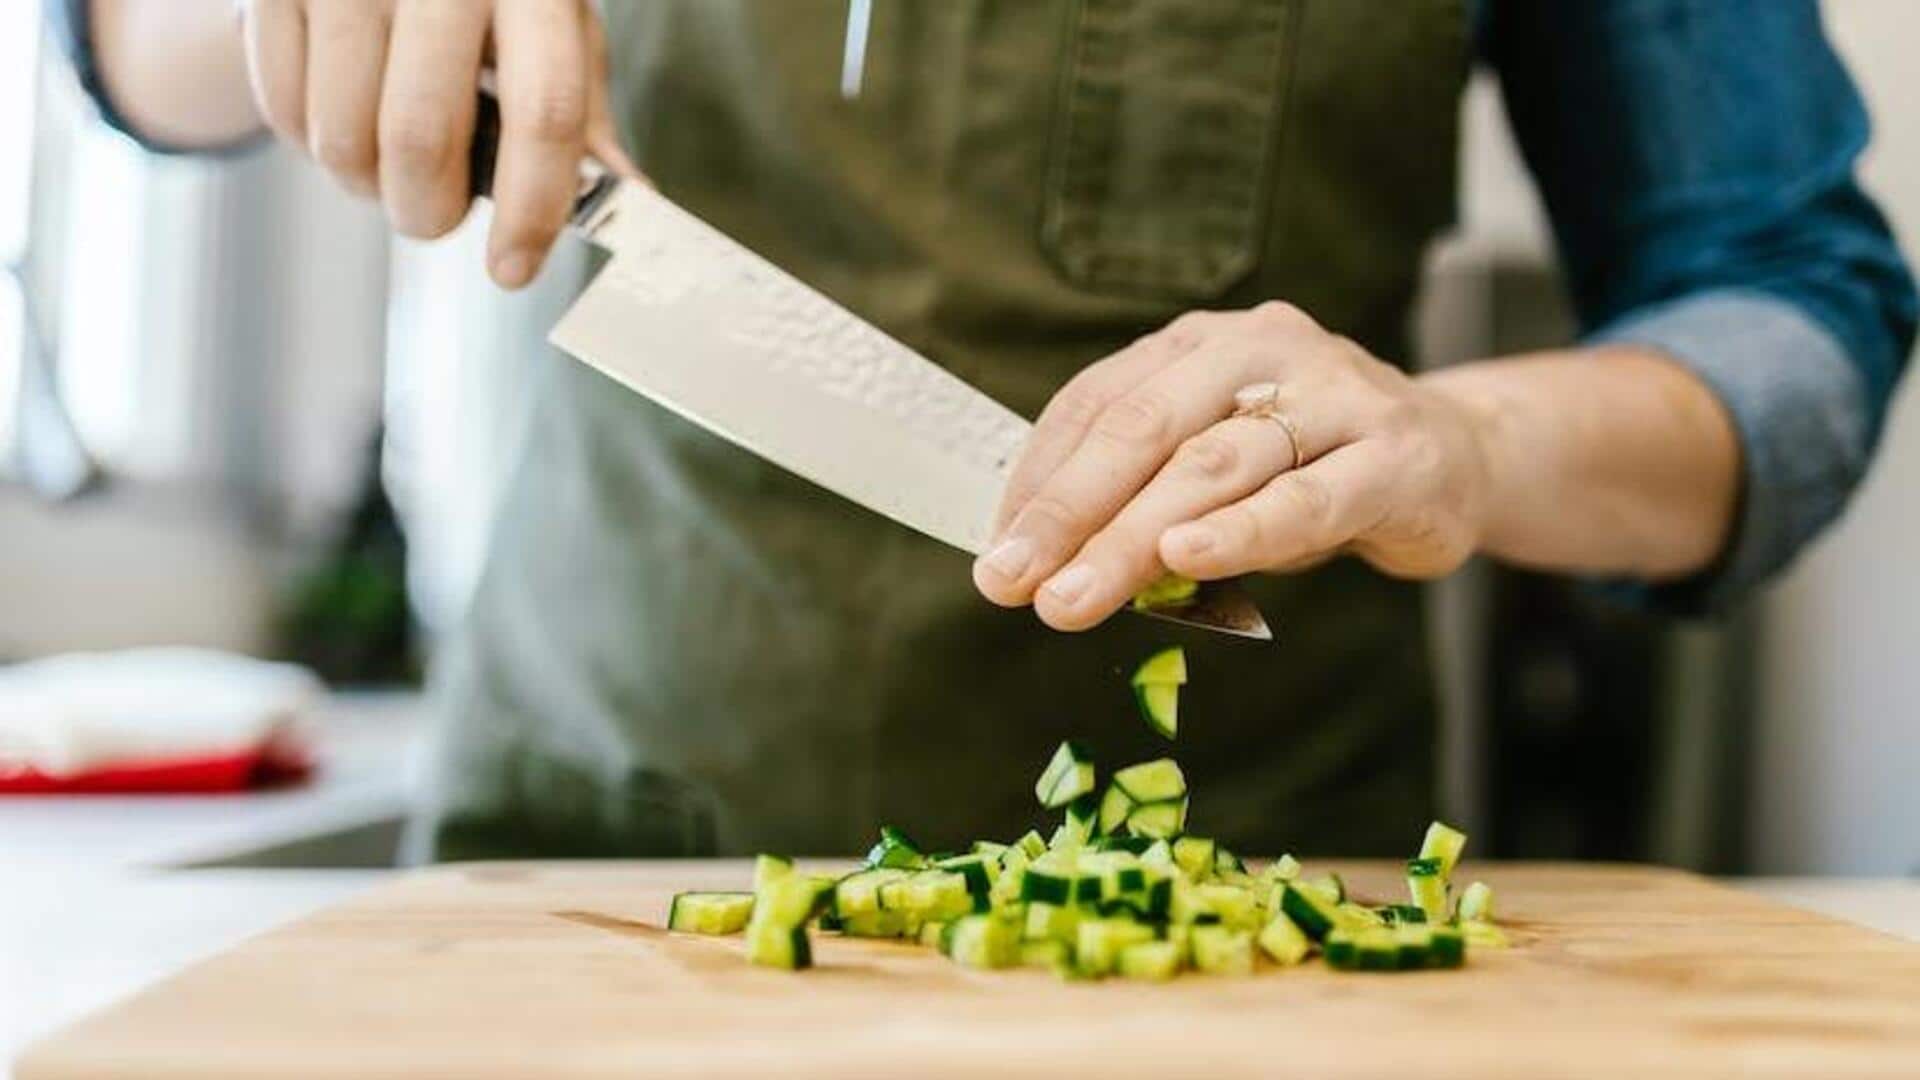 Learn the difference between chopping, grating, slicing, dicing, and mincing